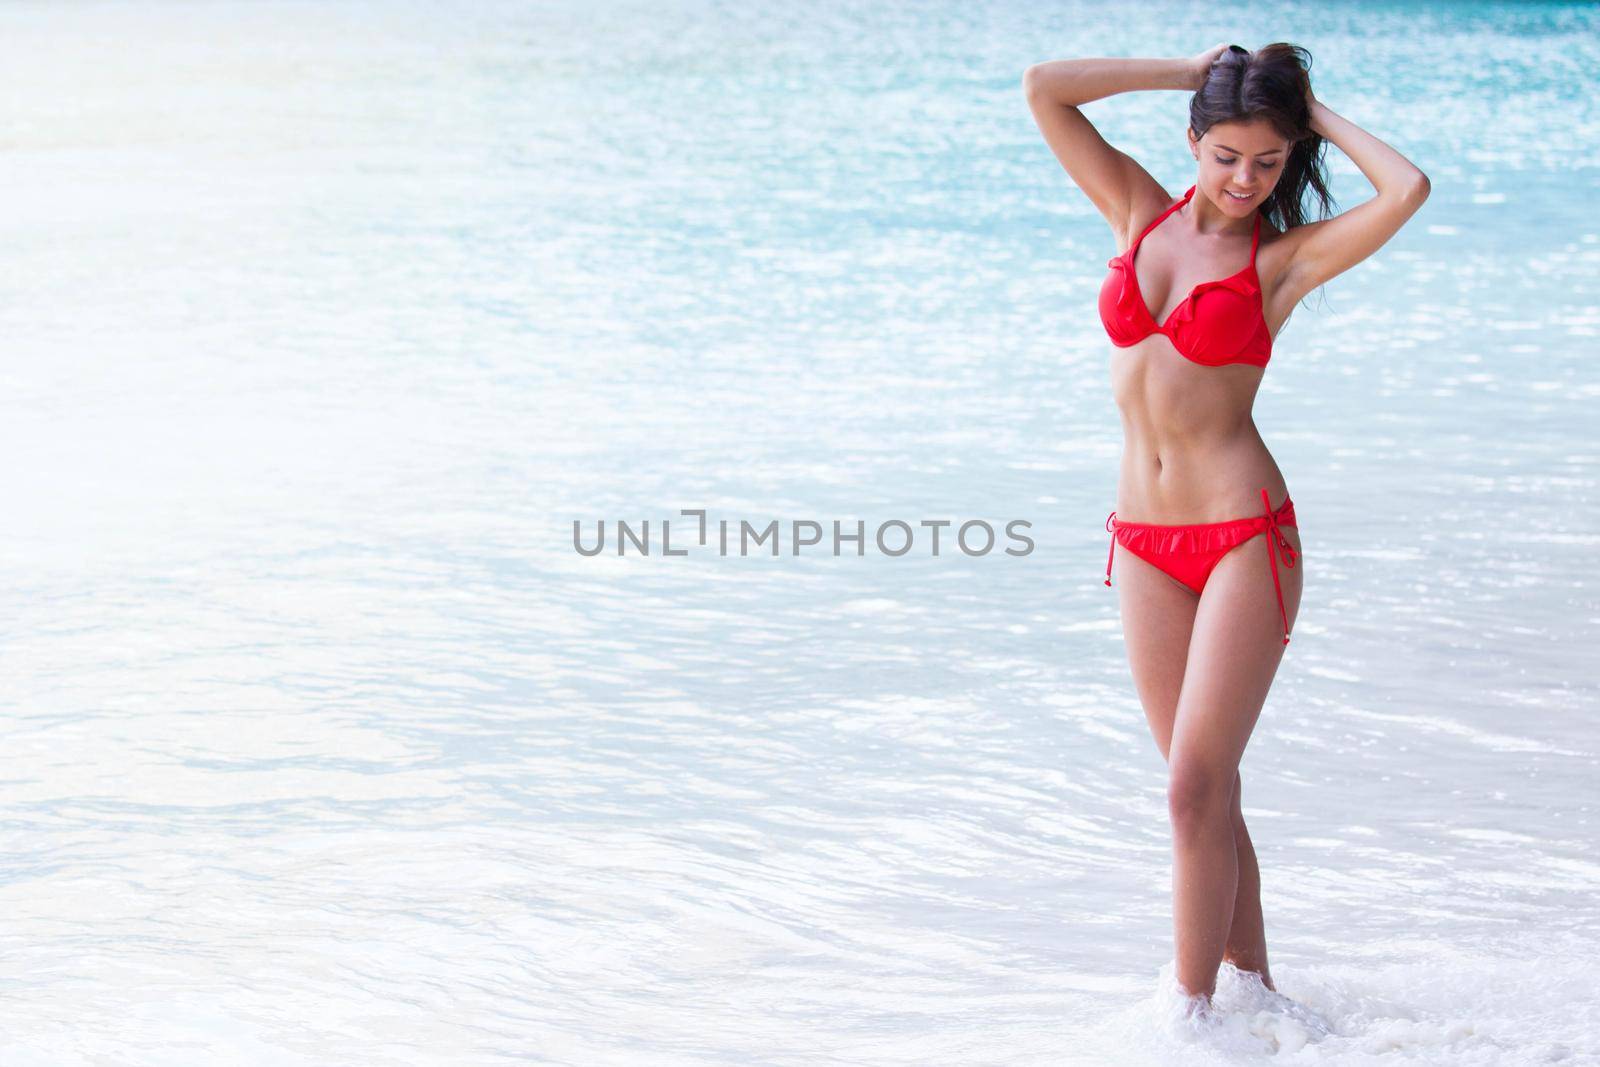 Beautiful smiling woman on summer vacation posing in front of the ocean in her red bikini